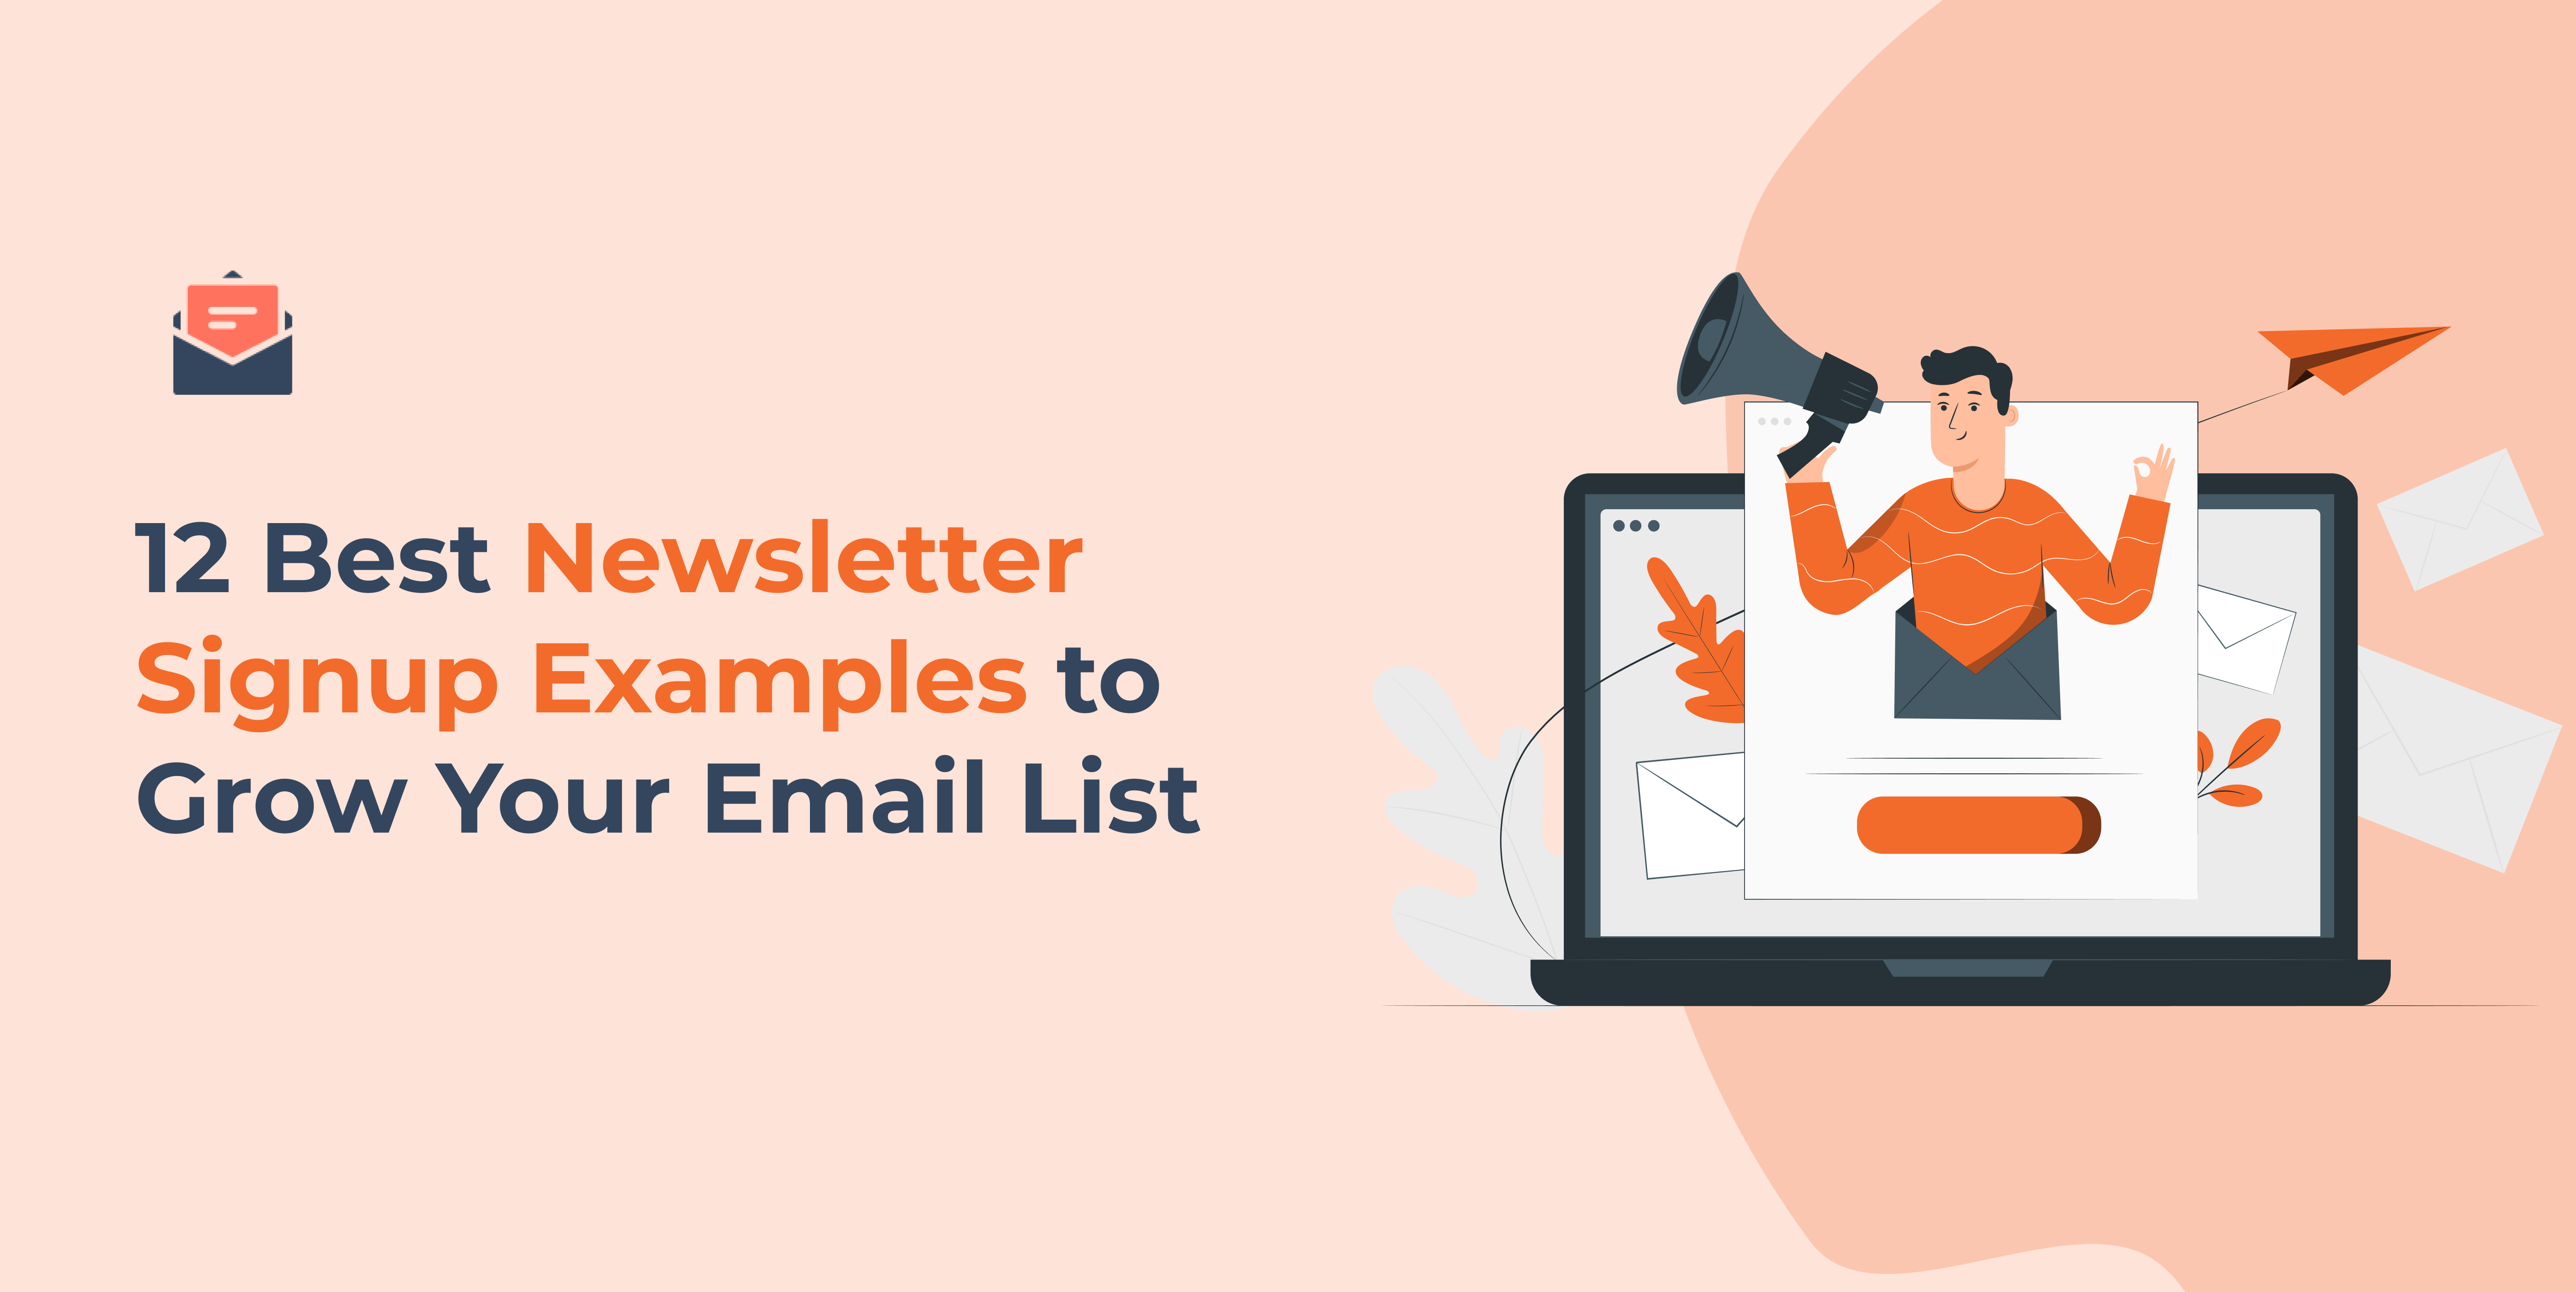 12 Best Newsletter Signup Examples to Grow Your Email List